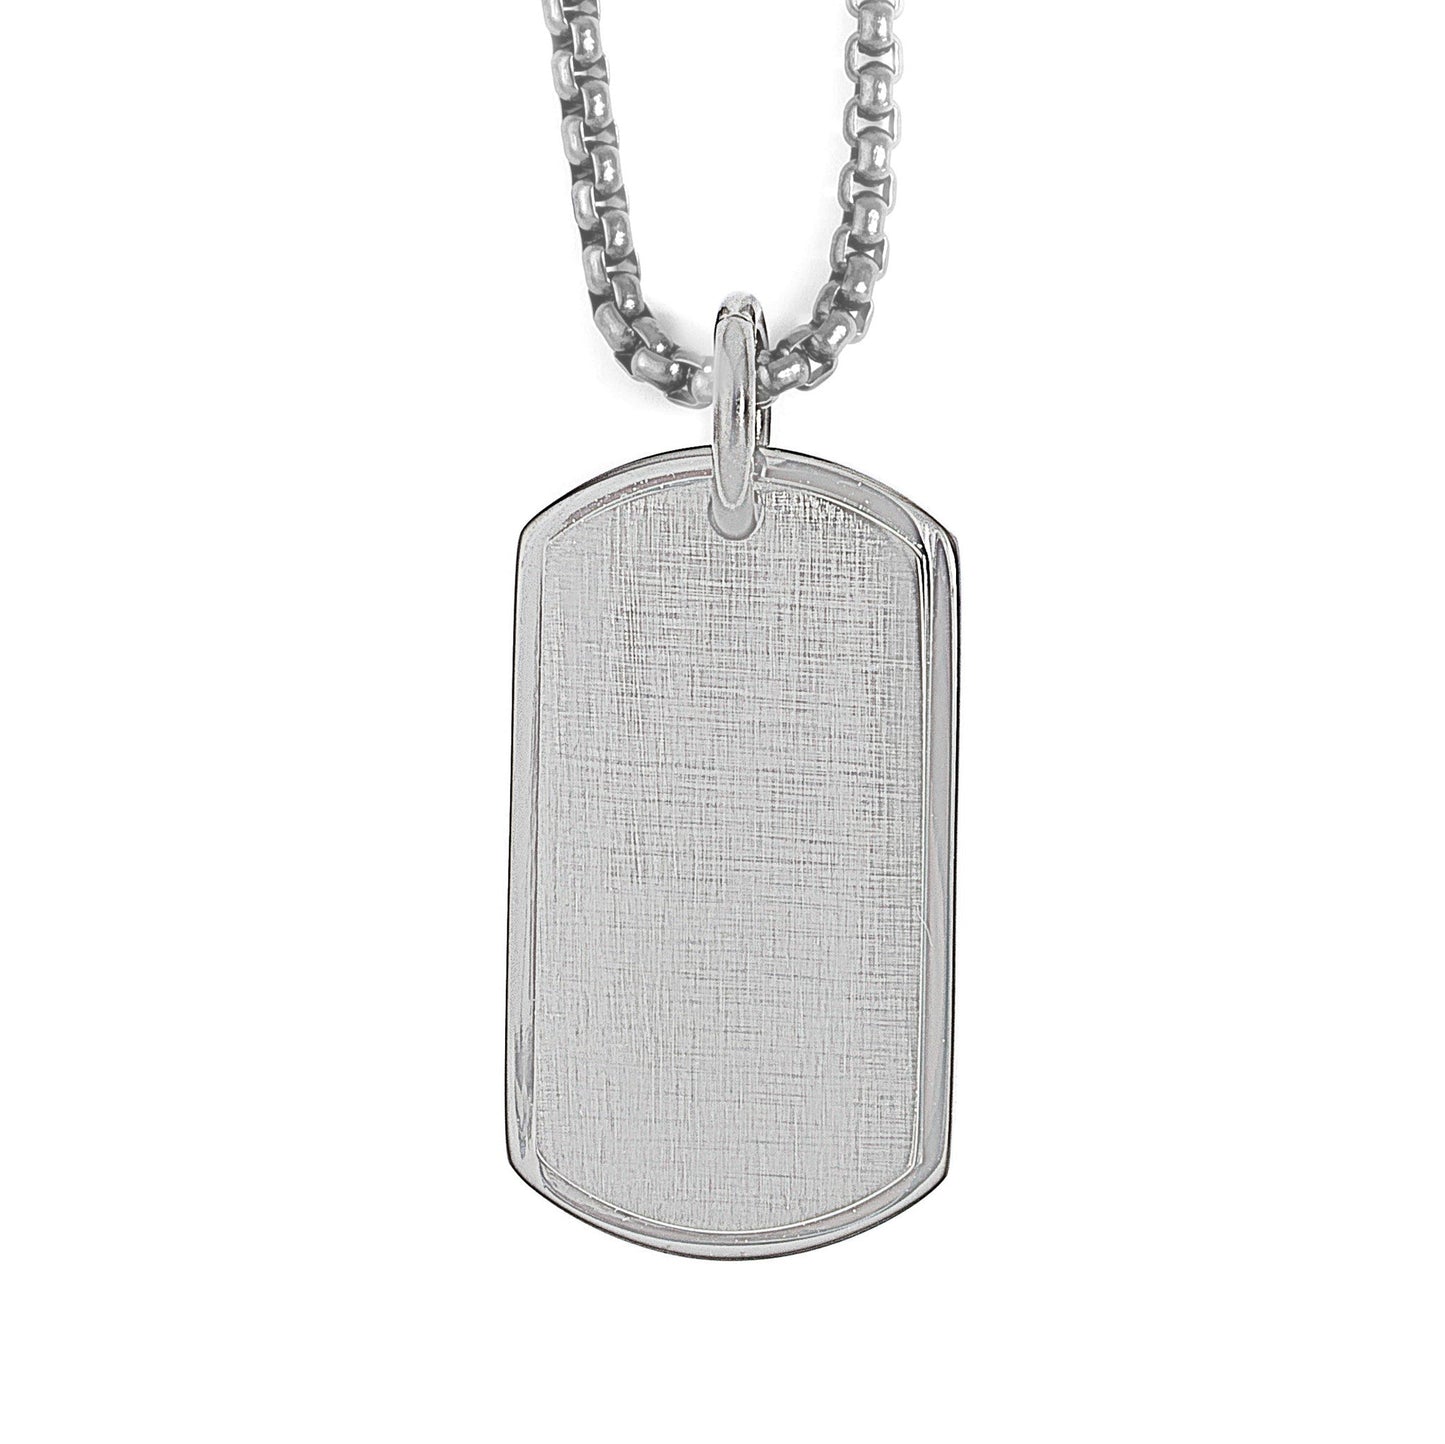 A stainless steel satin finish dog tags on chain displayed on a neutral white background.